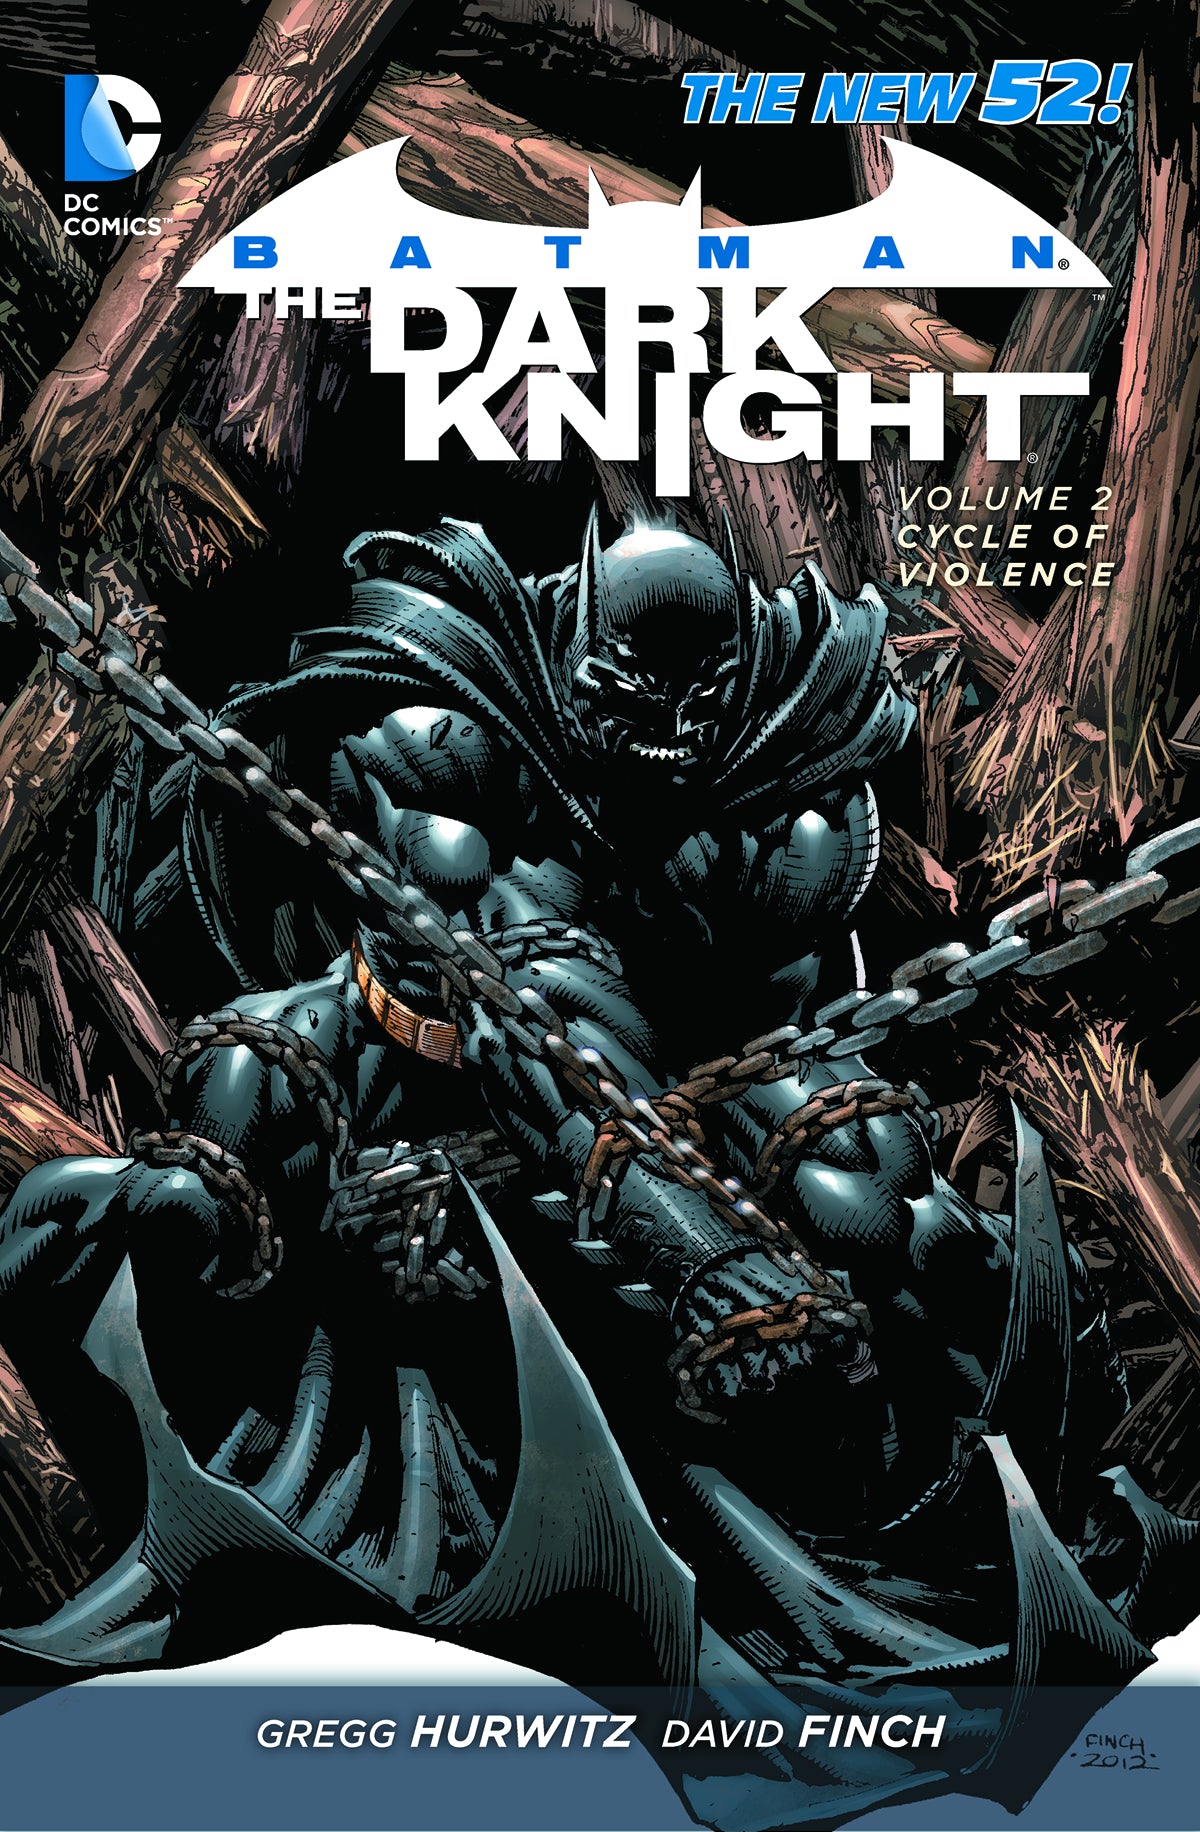 BATMAN DARK KNIGHT HC VOL 02 CYCLE OF VIOLENCE (N52) | Game Master's Emporium (The New GME)